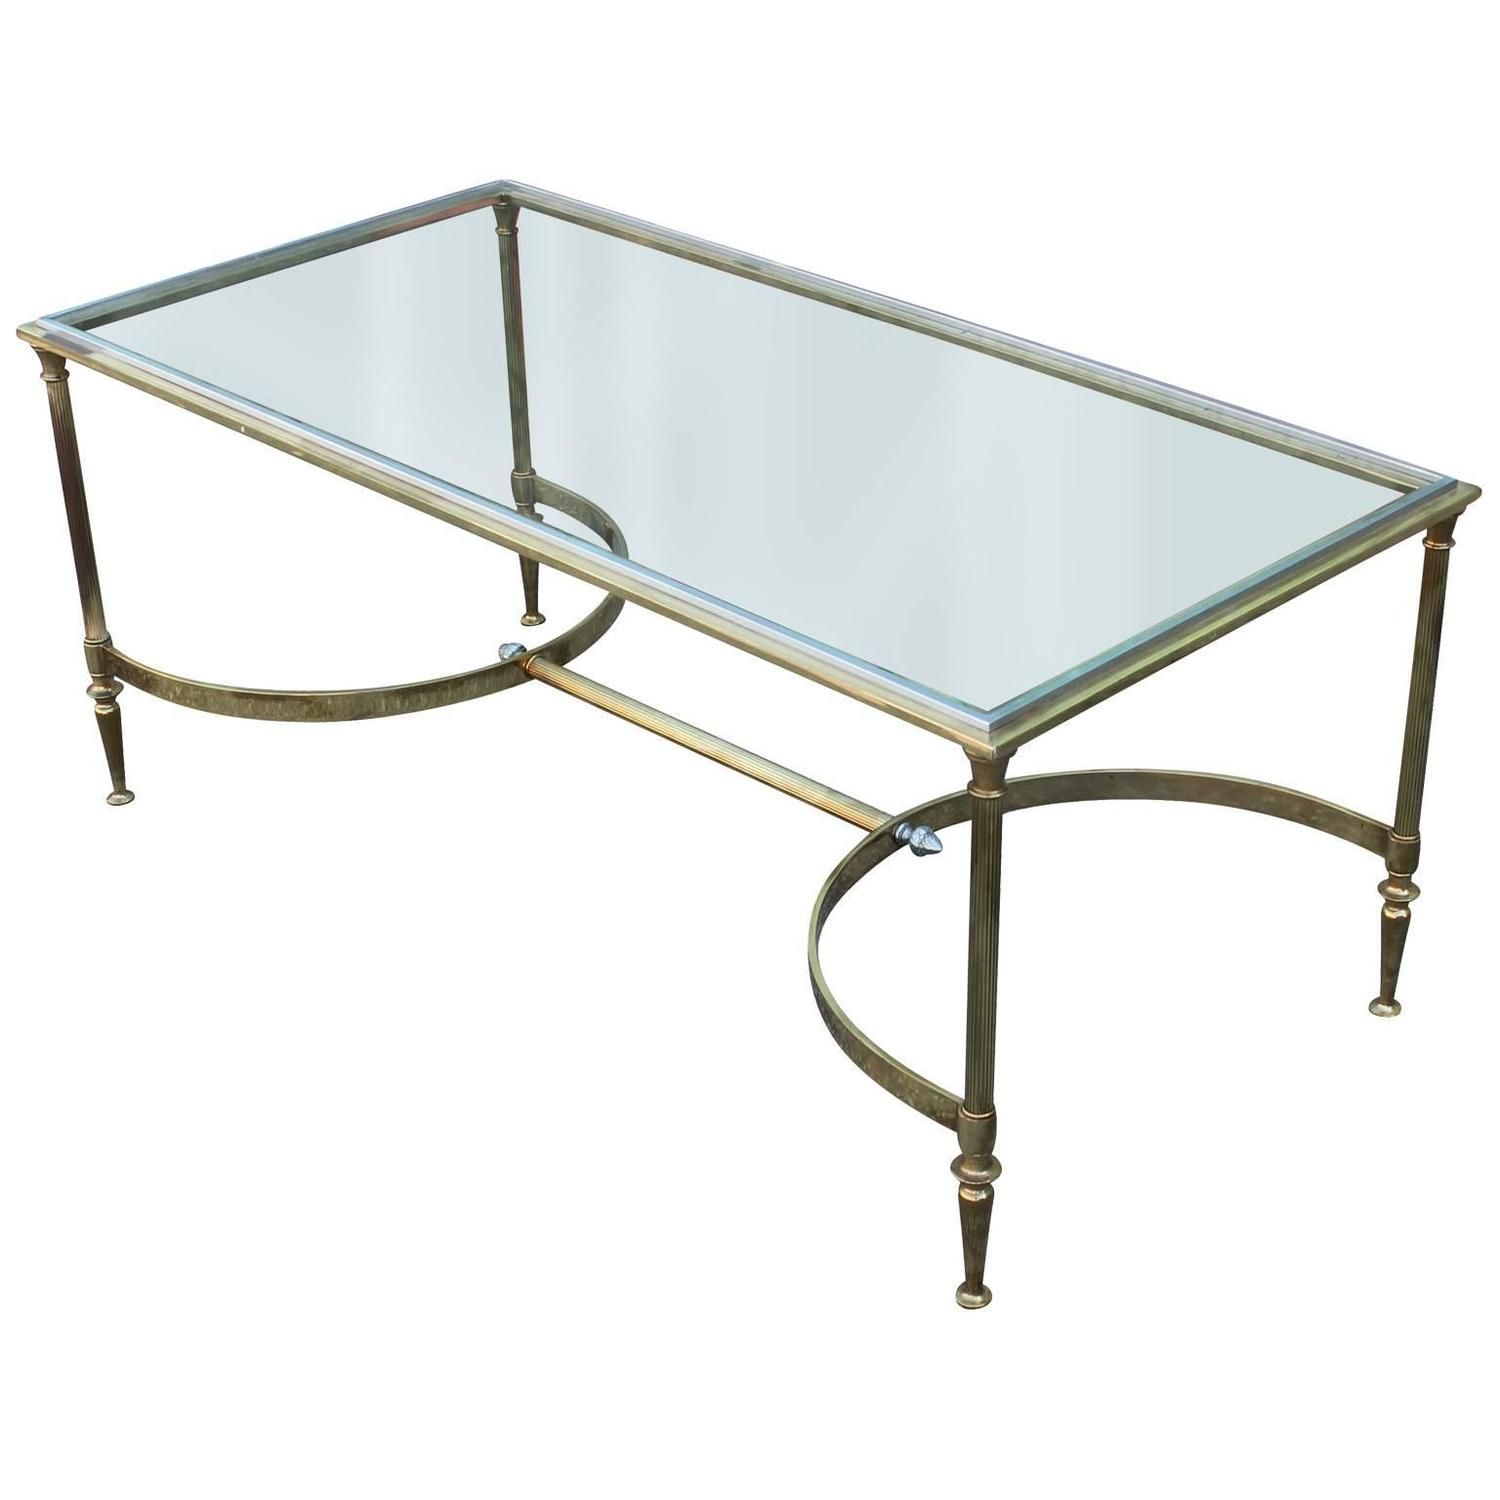 Elegant Brass And Glass Cocktail Table With Chrome Accents Inside Glass And Chrome Cocktail Tables (View 6 of 15)